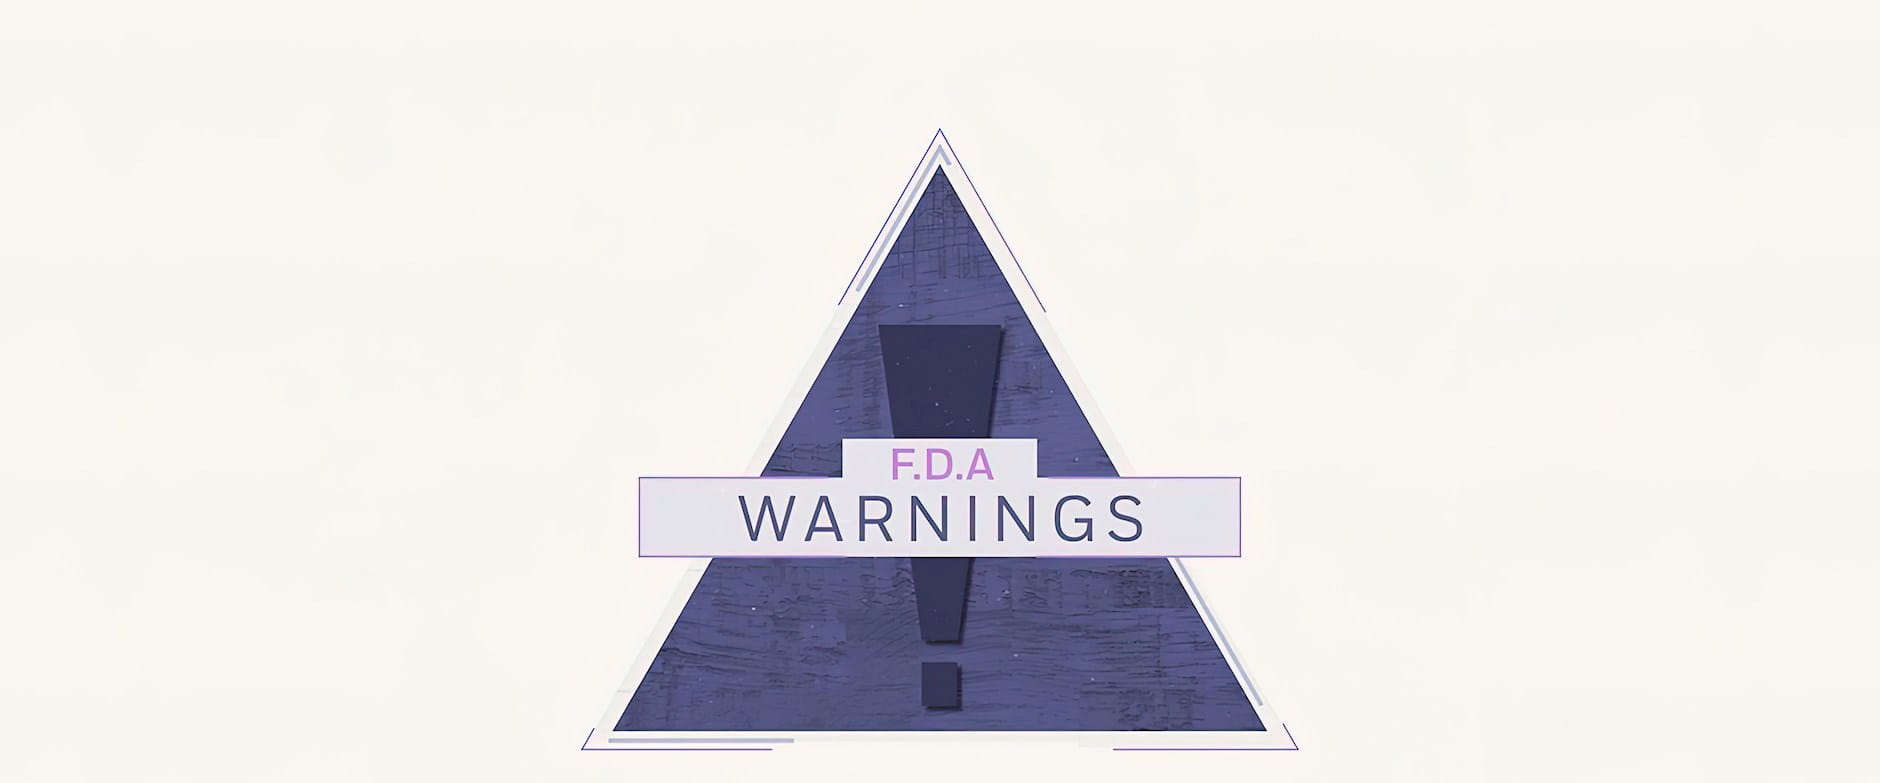 Illustrated warning triangle that reads "F.D.A. Warnings"